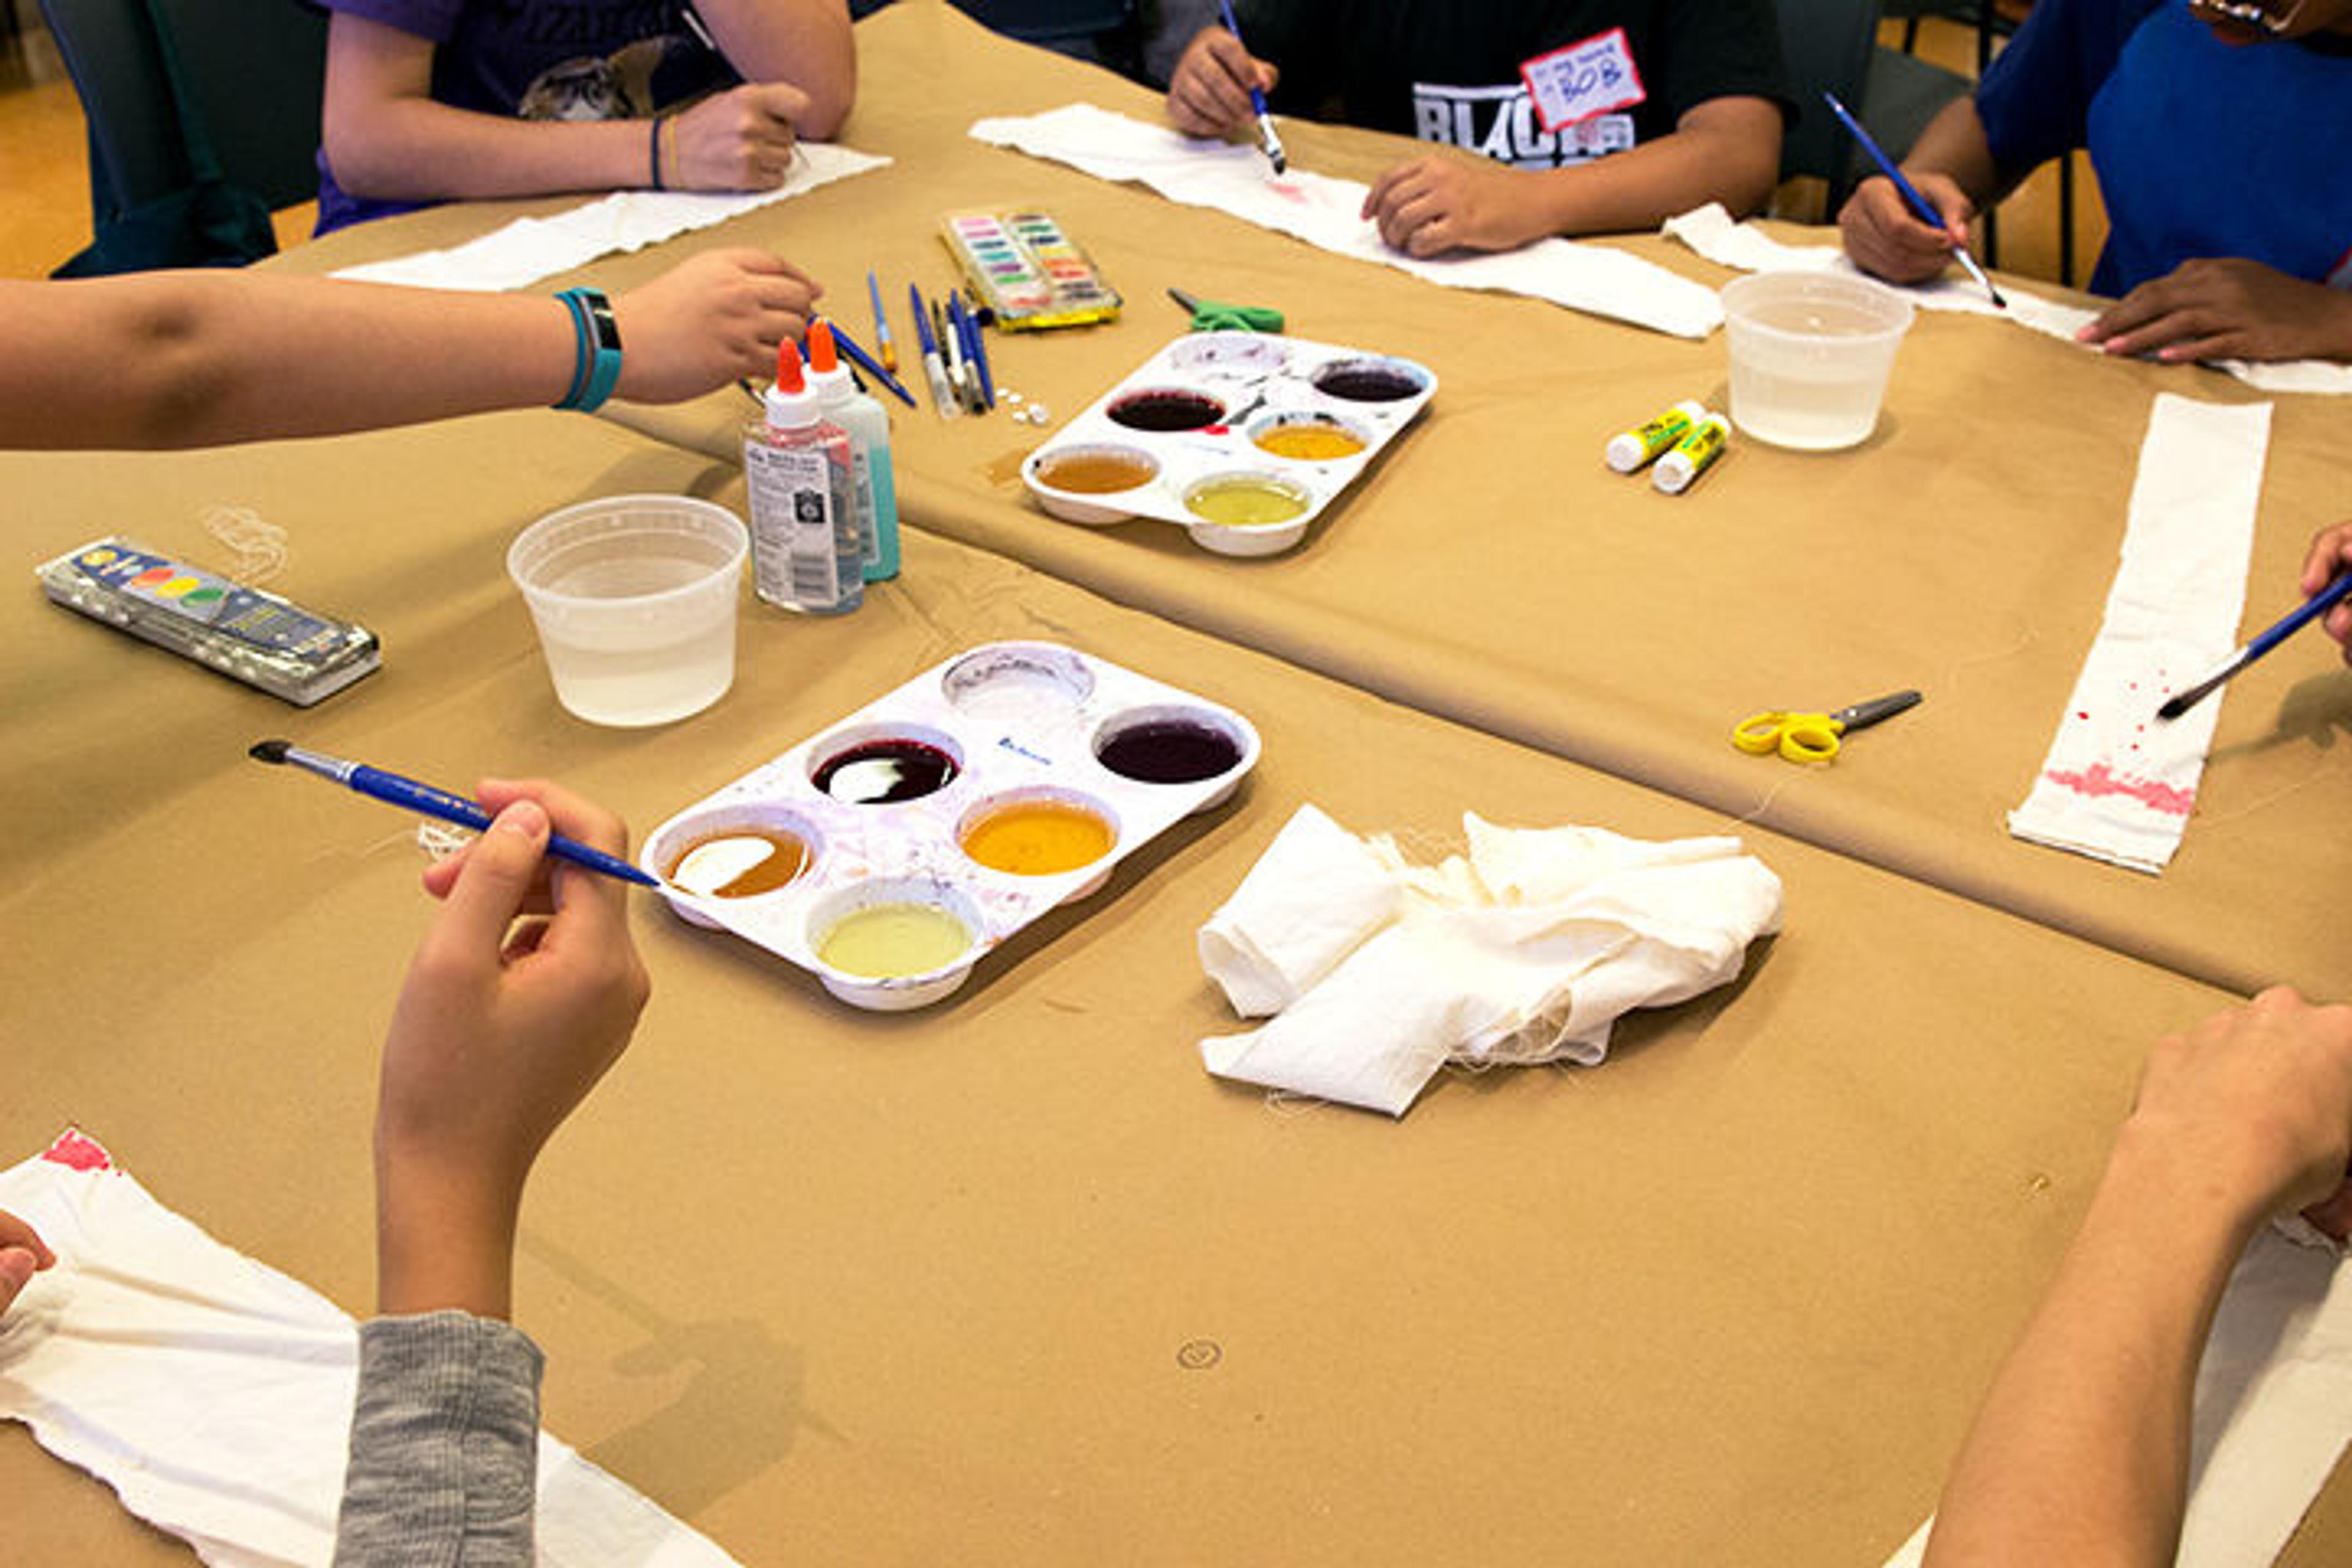 Kids and teens use brushes to paint the dye onto strips of muslin cloth.